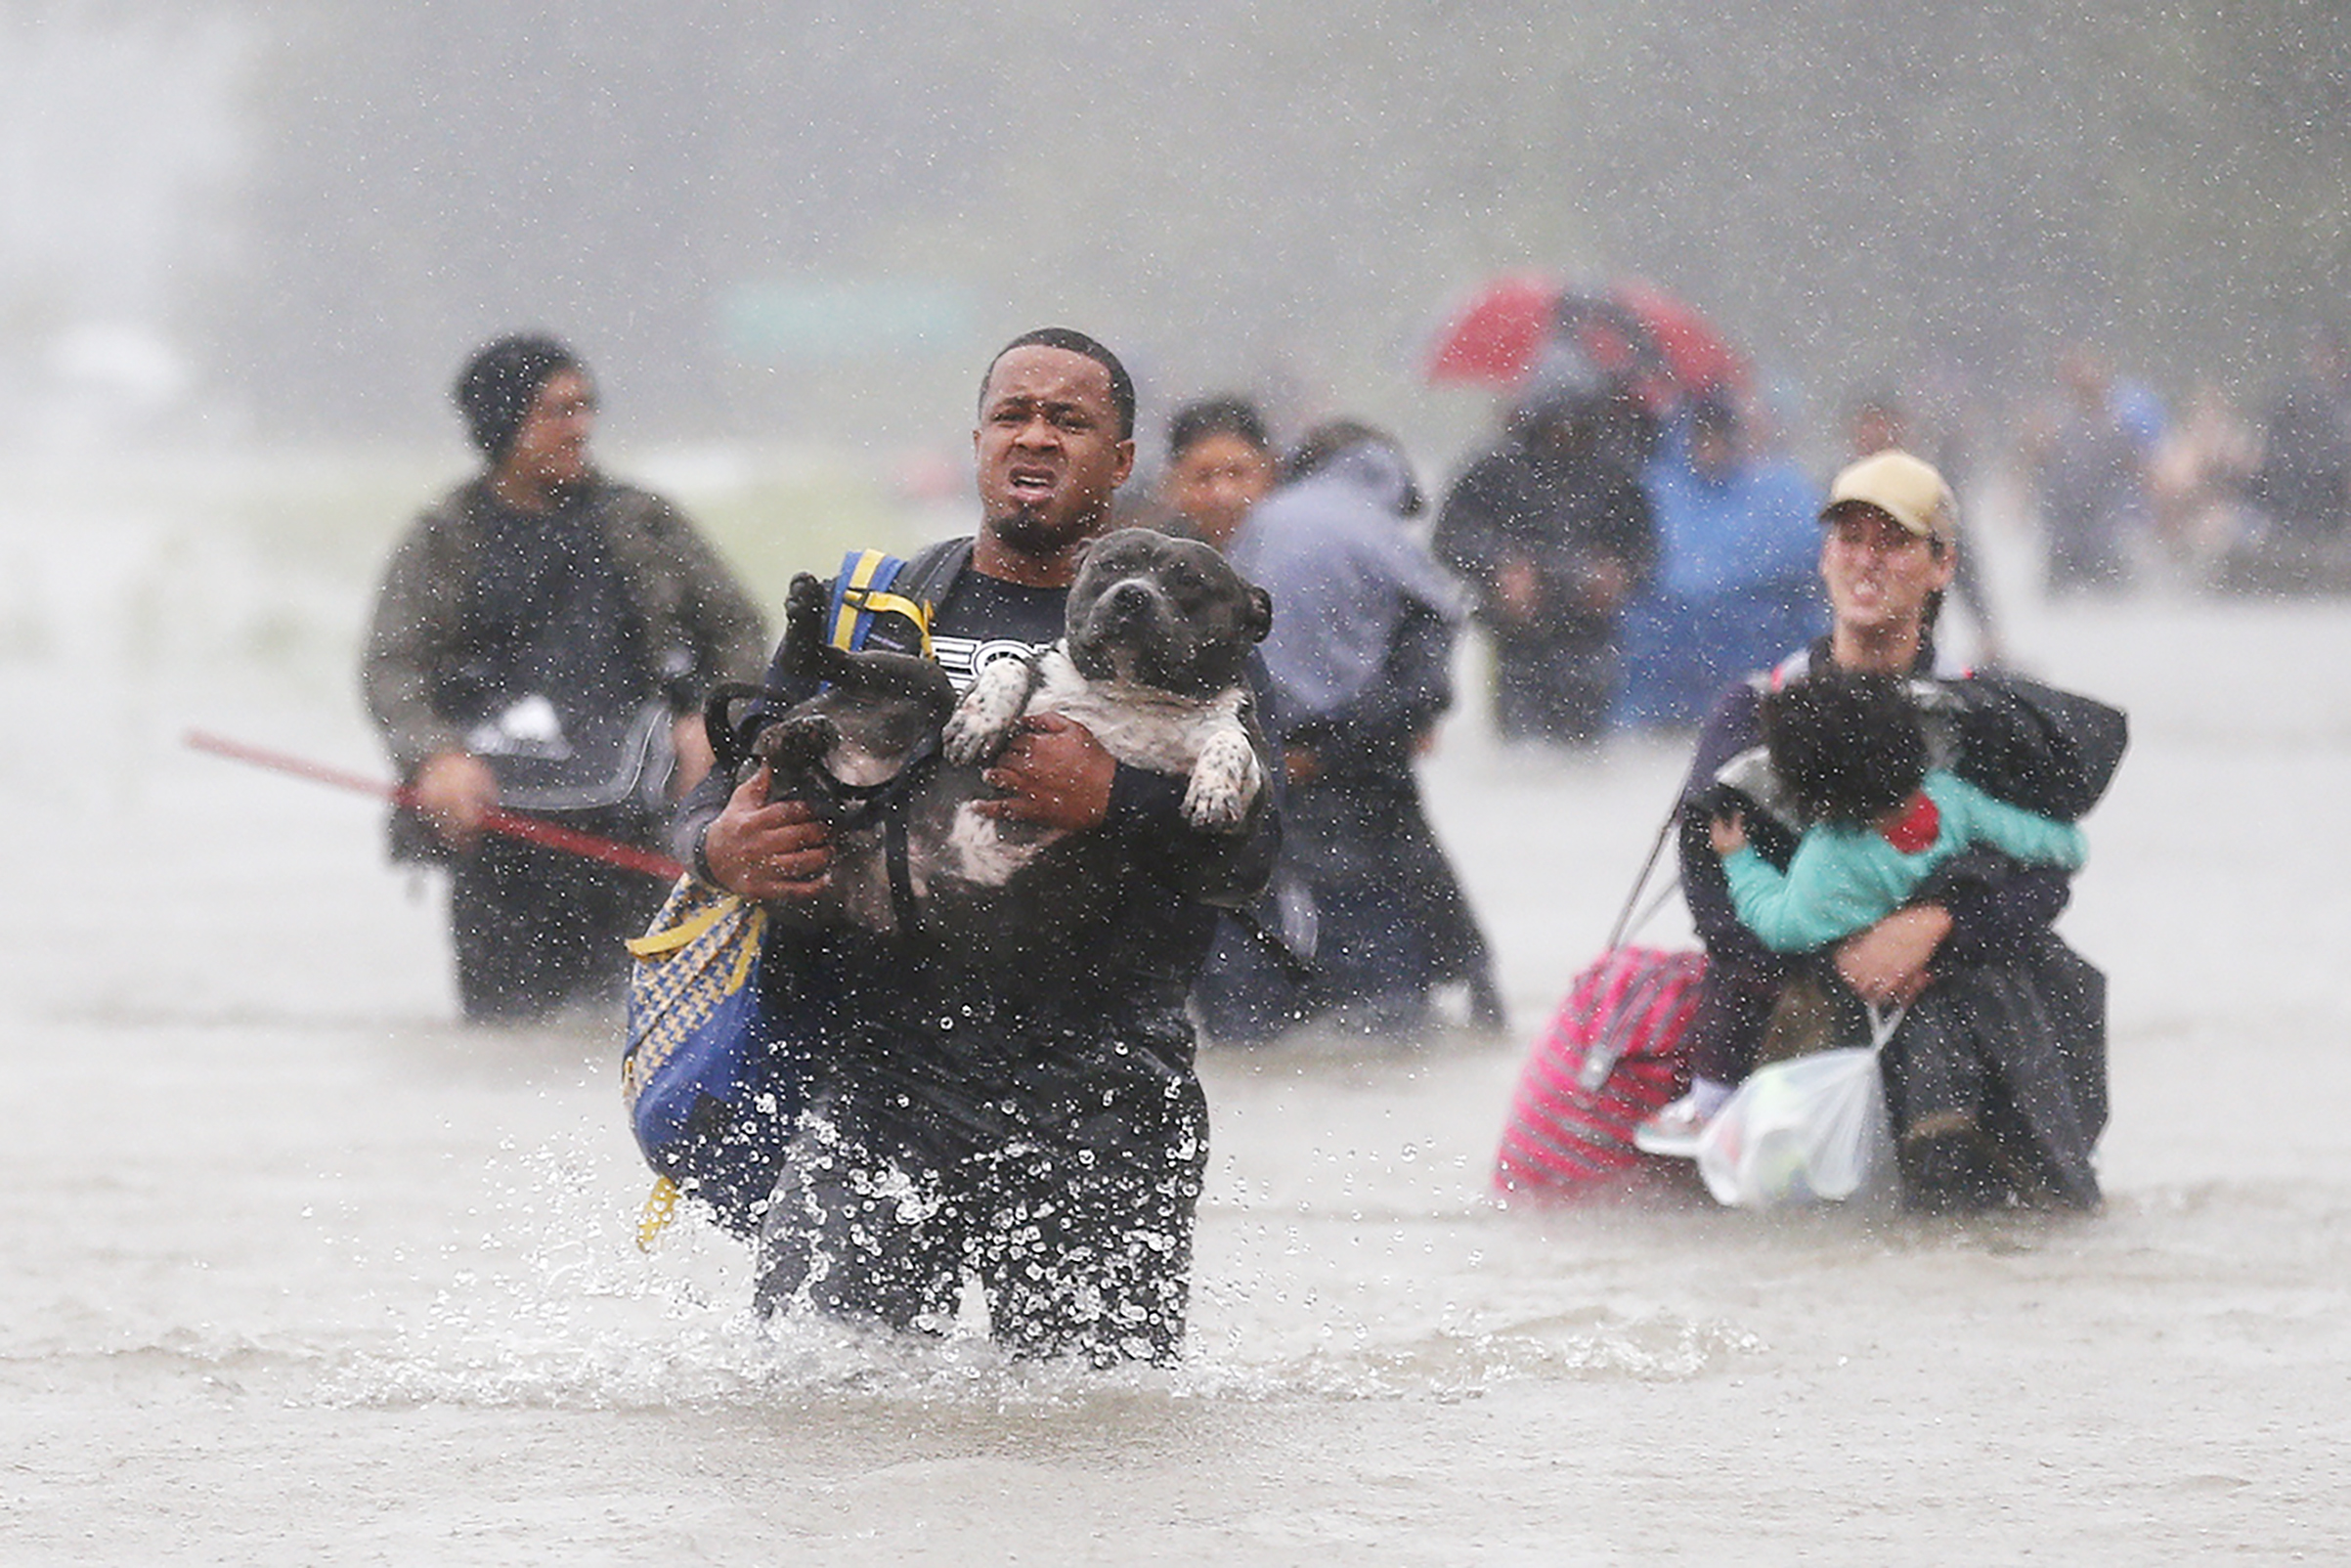 Isiah Courtney carries his dog through floodwaters in this news photograph that sparked an outpouring of support (Jonathan Bachman—Reuters)